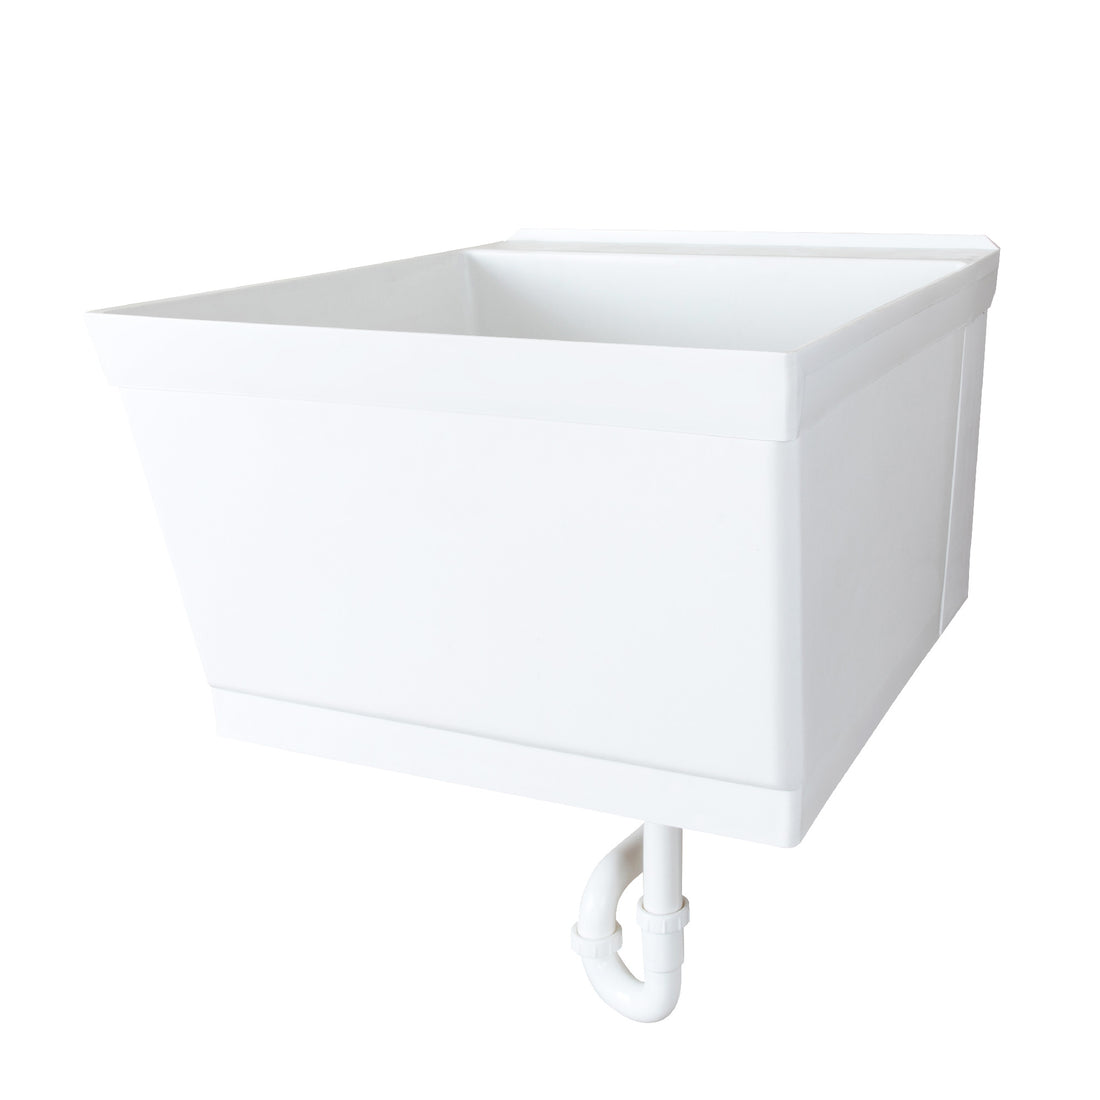 White Standard Utility Sink in white canva/background